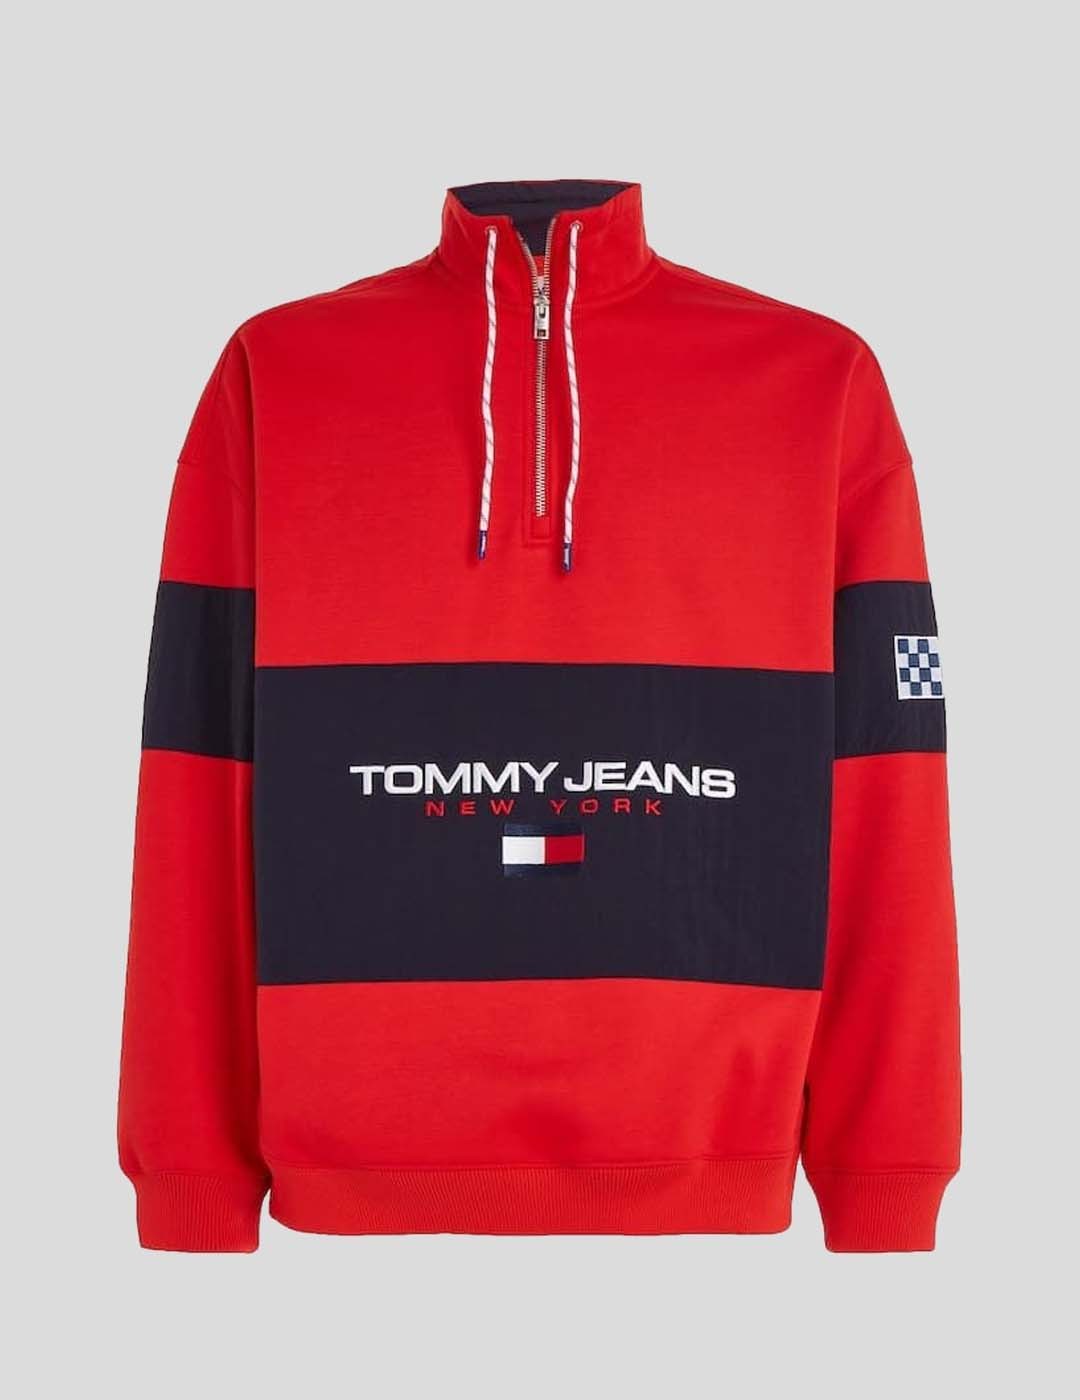 SUDADERA TOMMY JEANS OVERSIZE HALFZIP SWEATER XNL RED